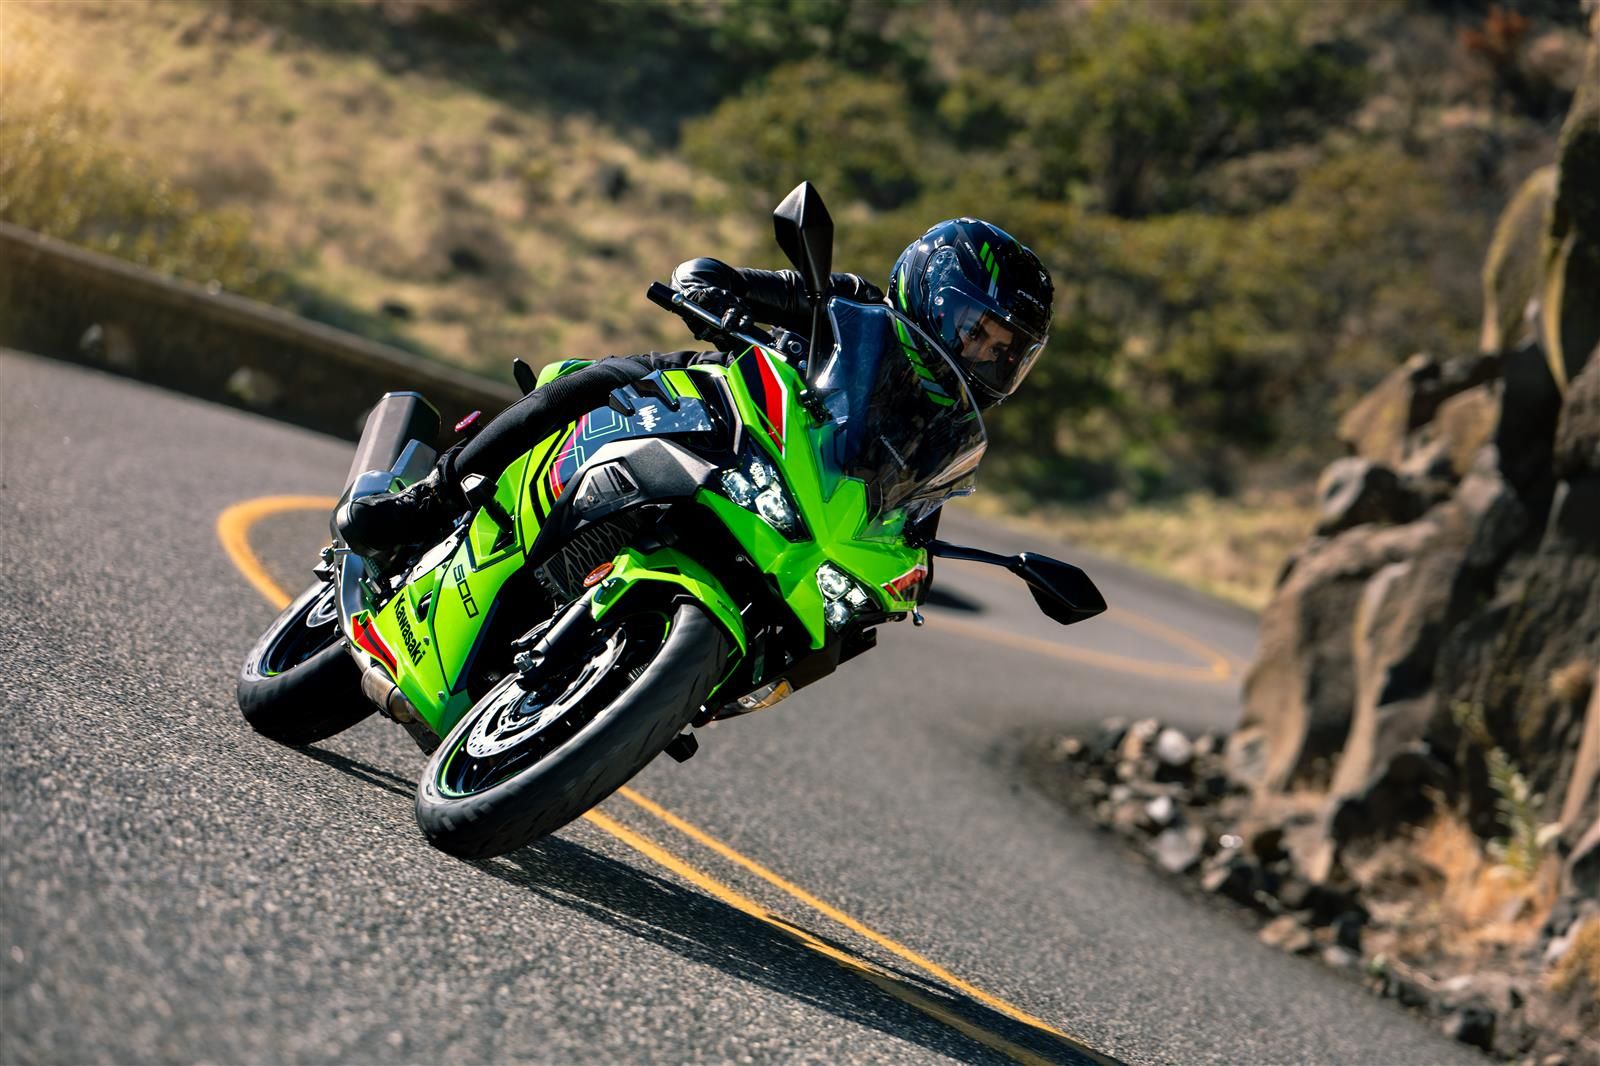 Kawasaki Whips Up Ninja 500 And Z500 To Take The Fight To CFMoto